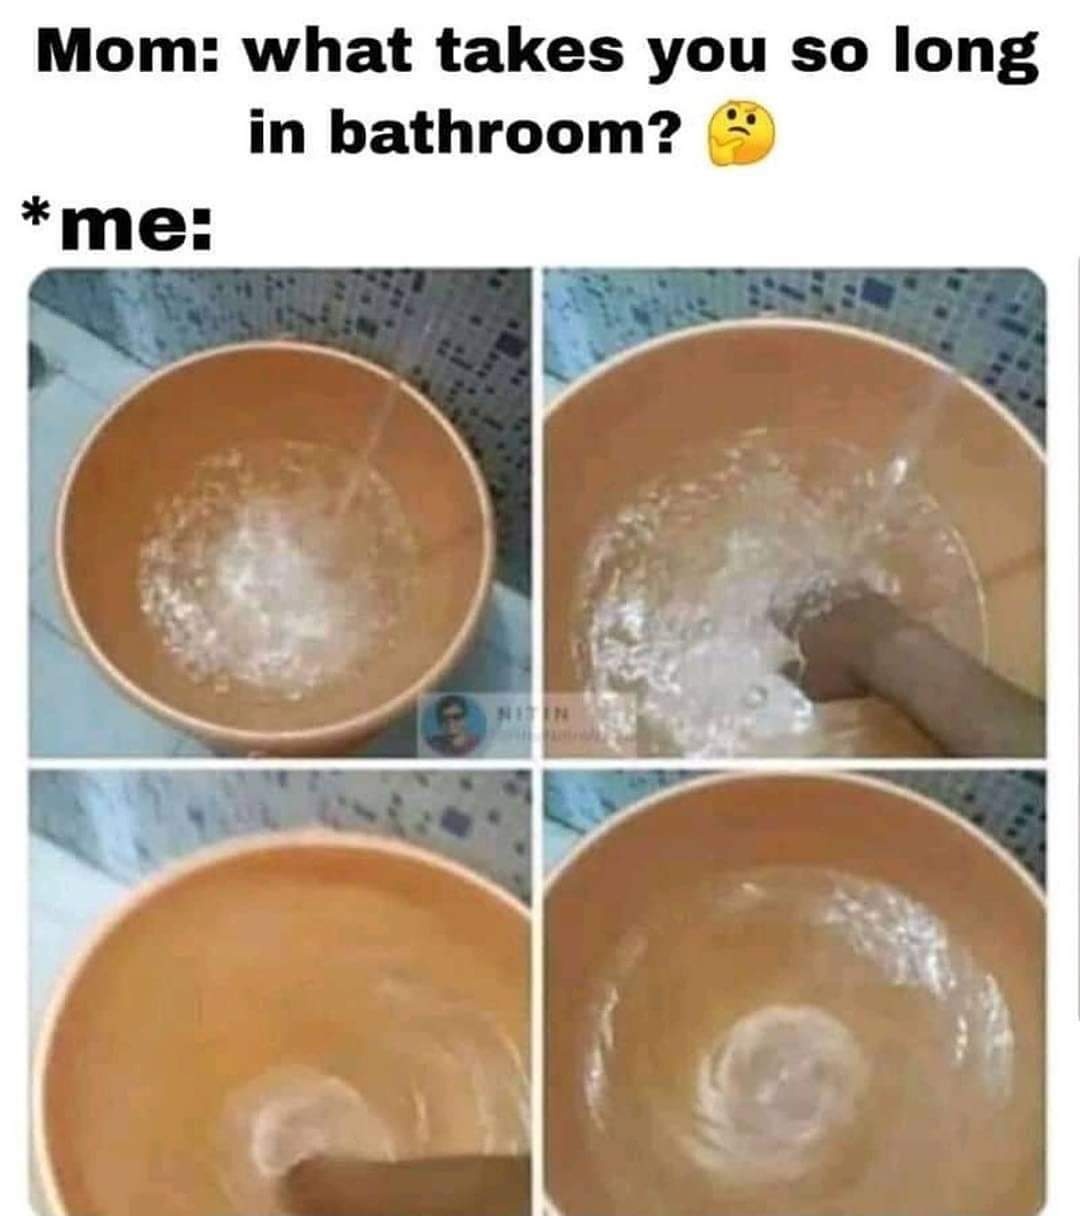 What takes you so long in bathroom?  CRAMEMS MEMES